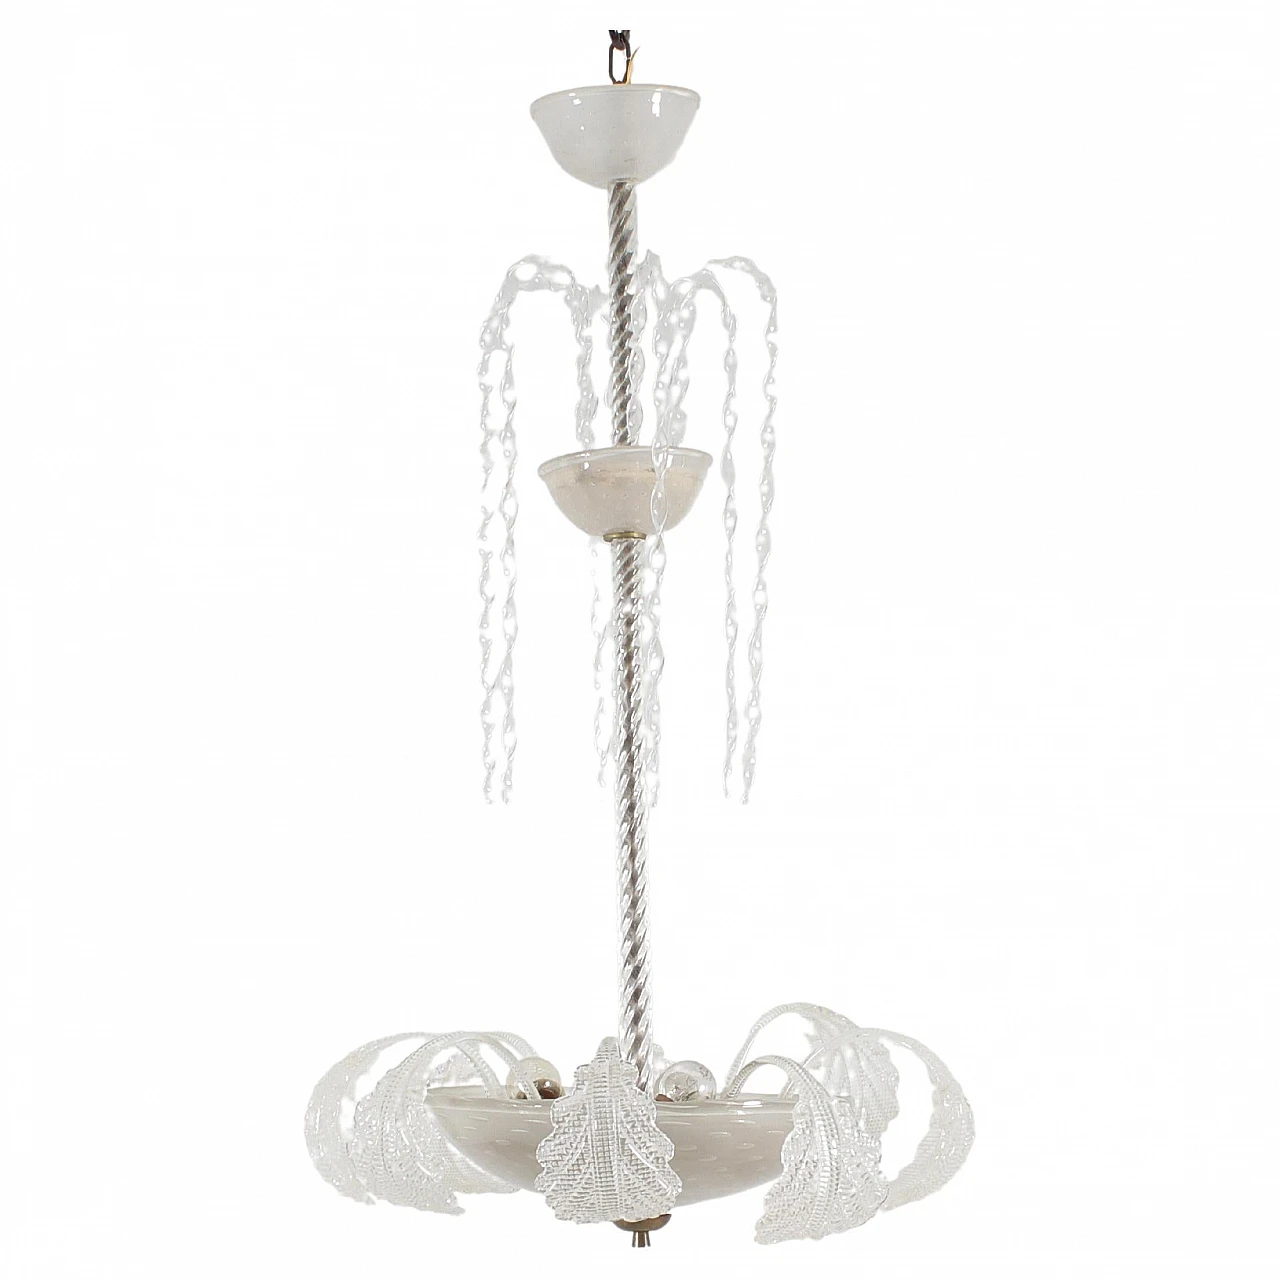 Murano glass chandelier attributed to Barovier & Toso, 1930s 1